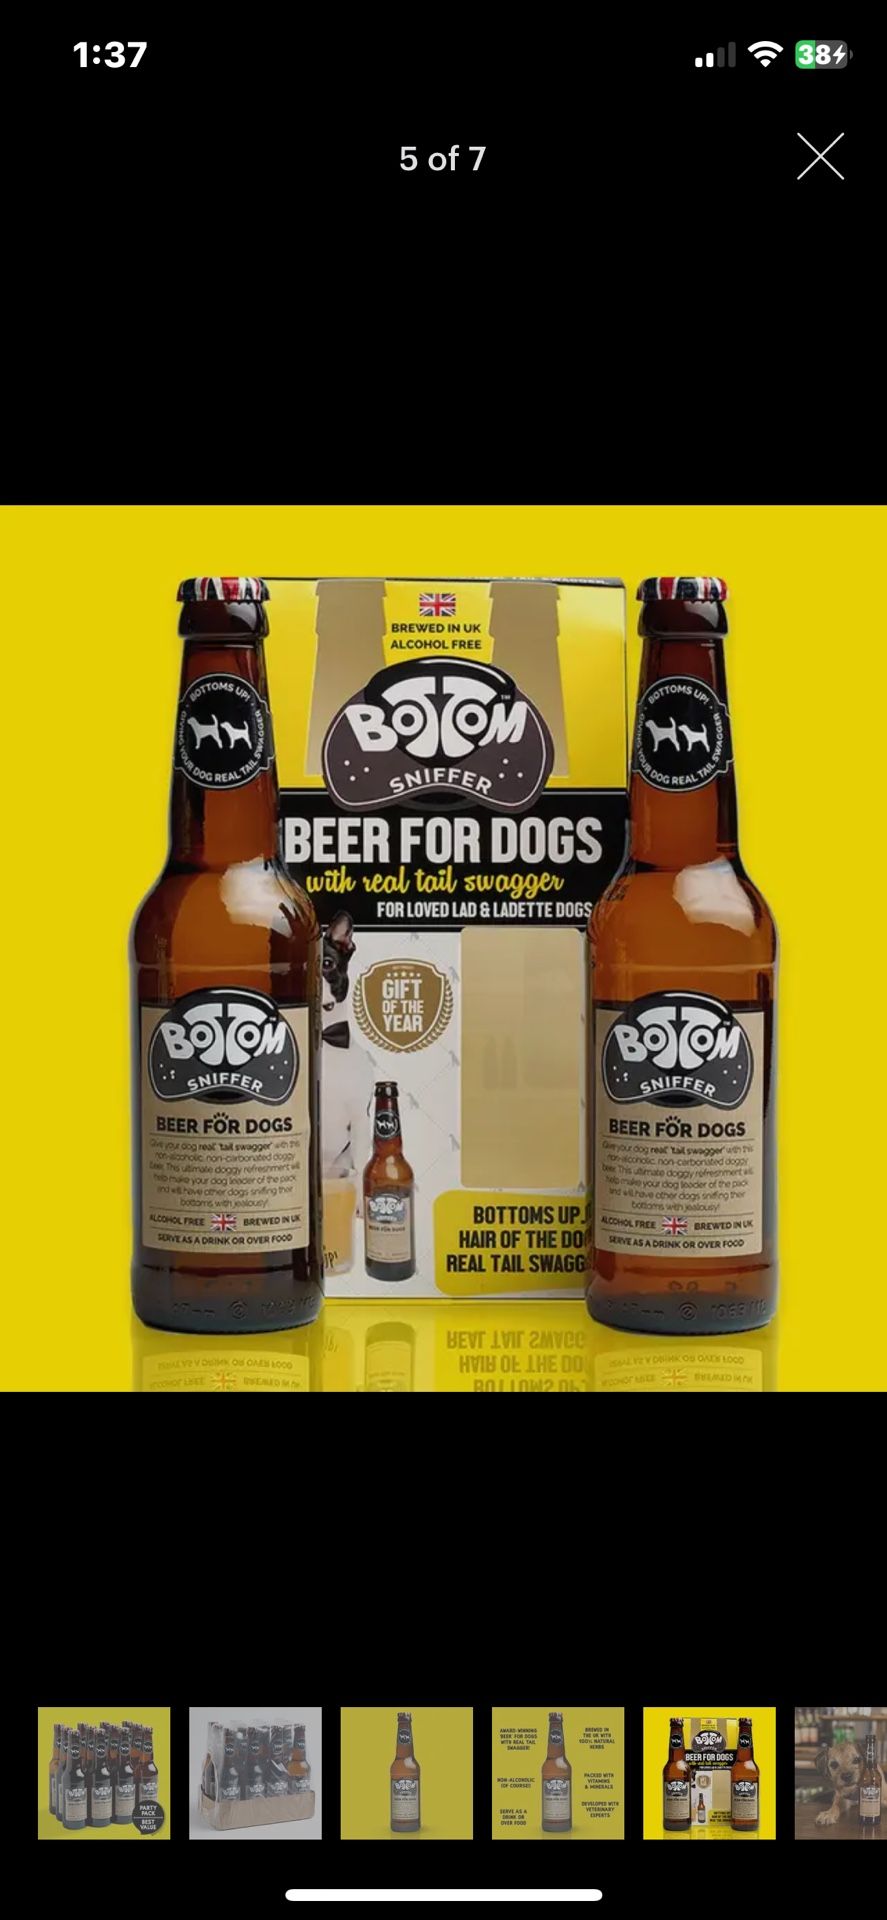 Non-alcoholic Beer For Dogs.